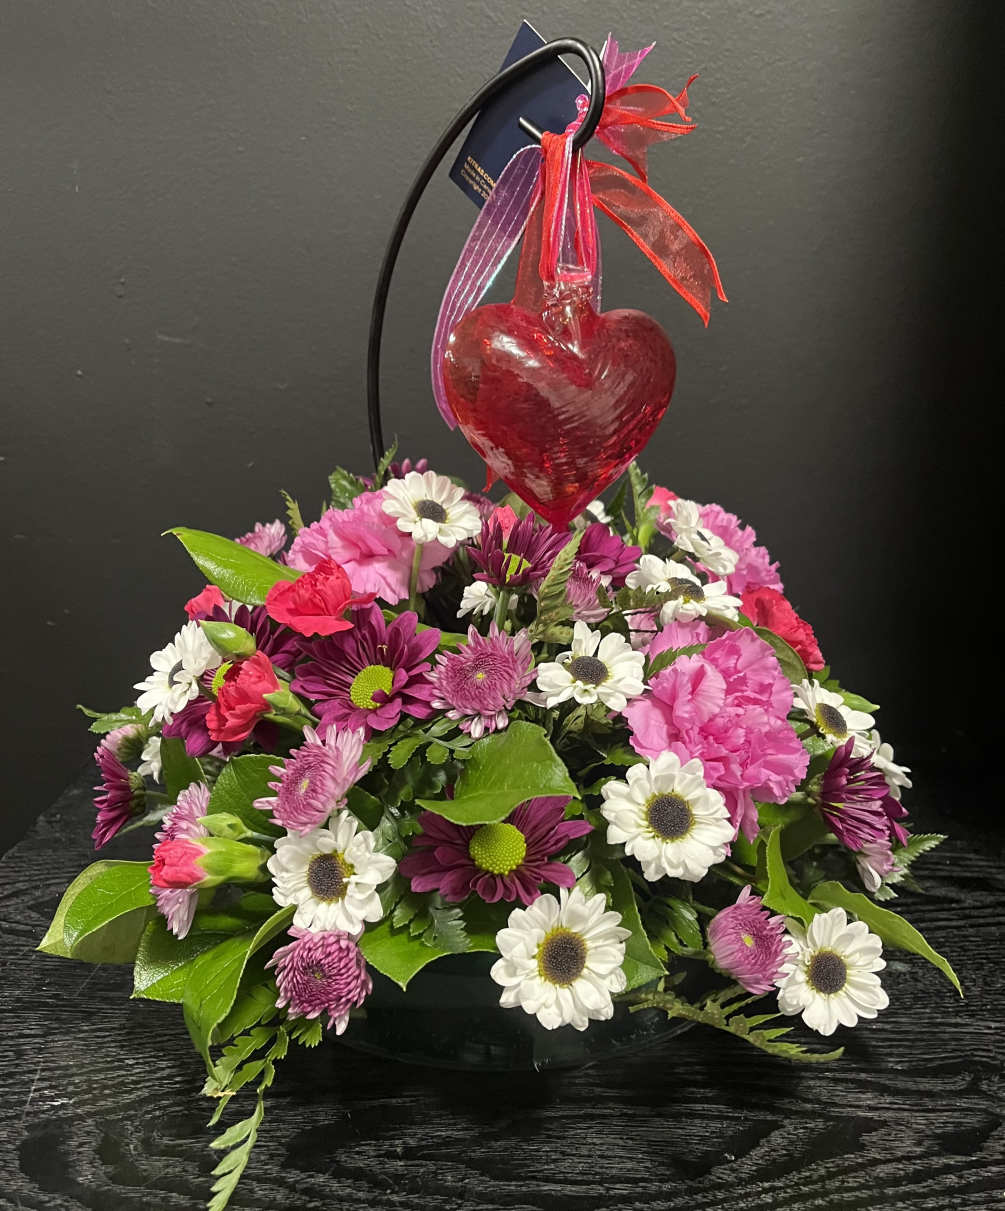 Beautiful Kitas glass heart in a bed of fresh flowers.  Stand